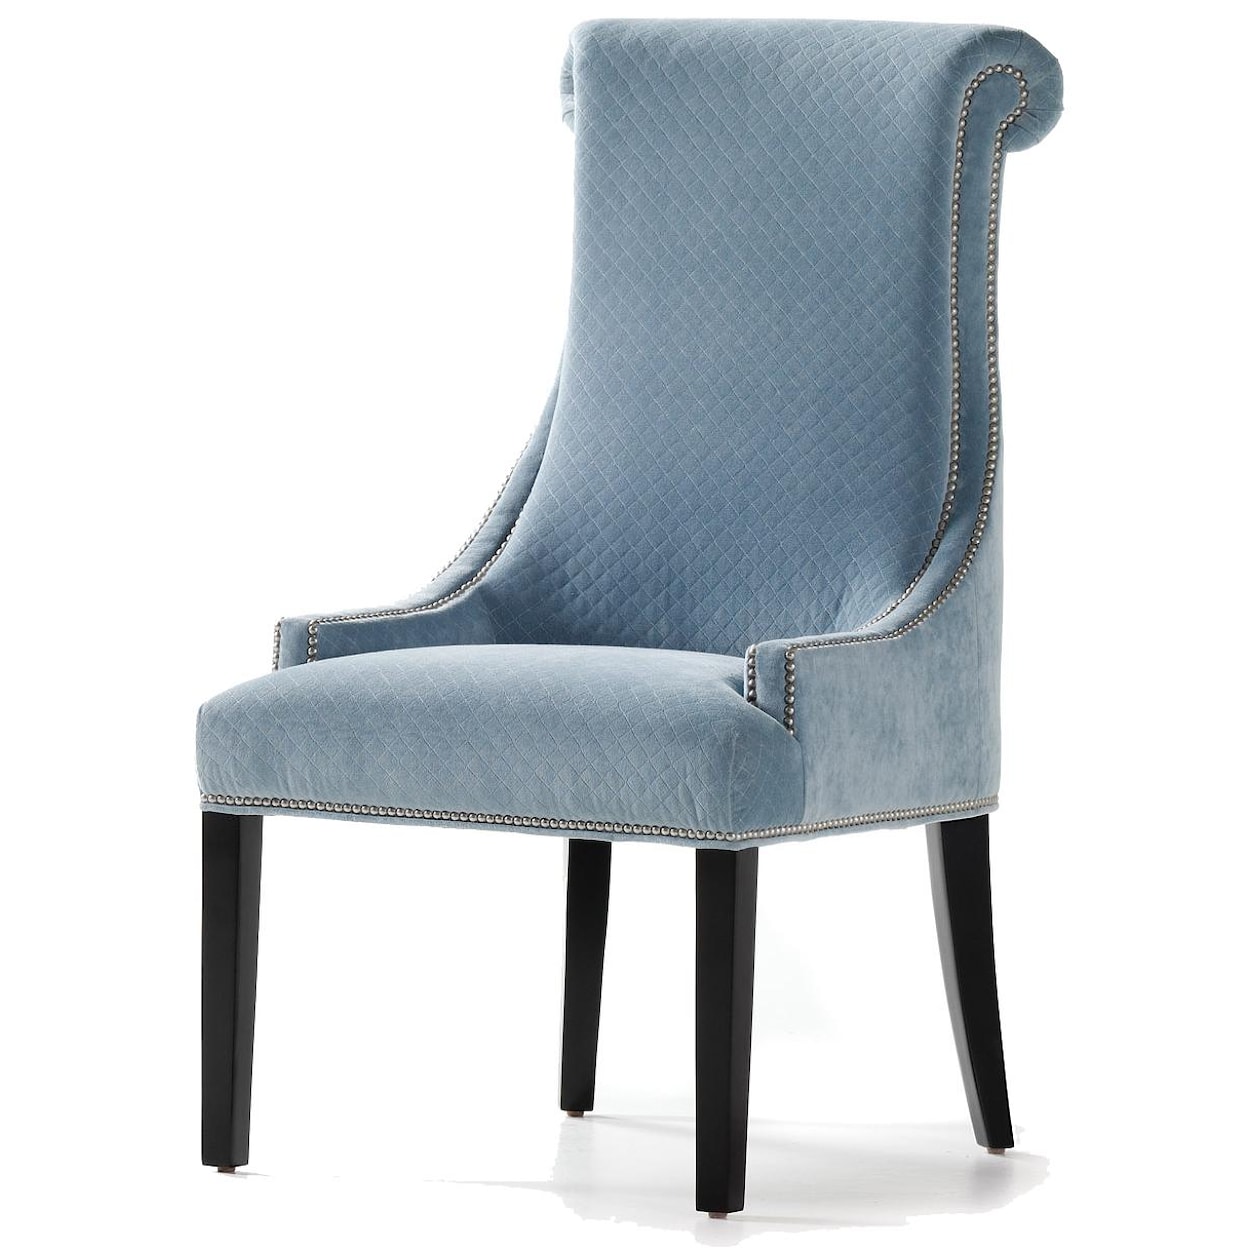 Jessica Charles Fine Upholstered Accents Ritter Dining Chair   